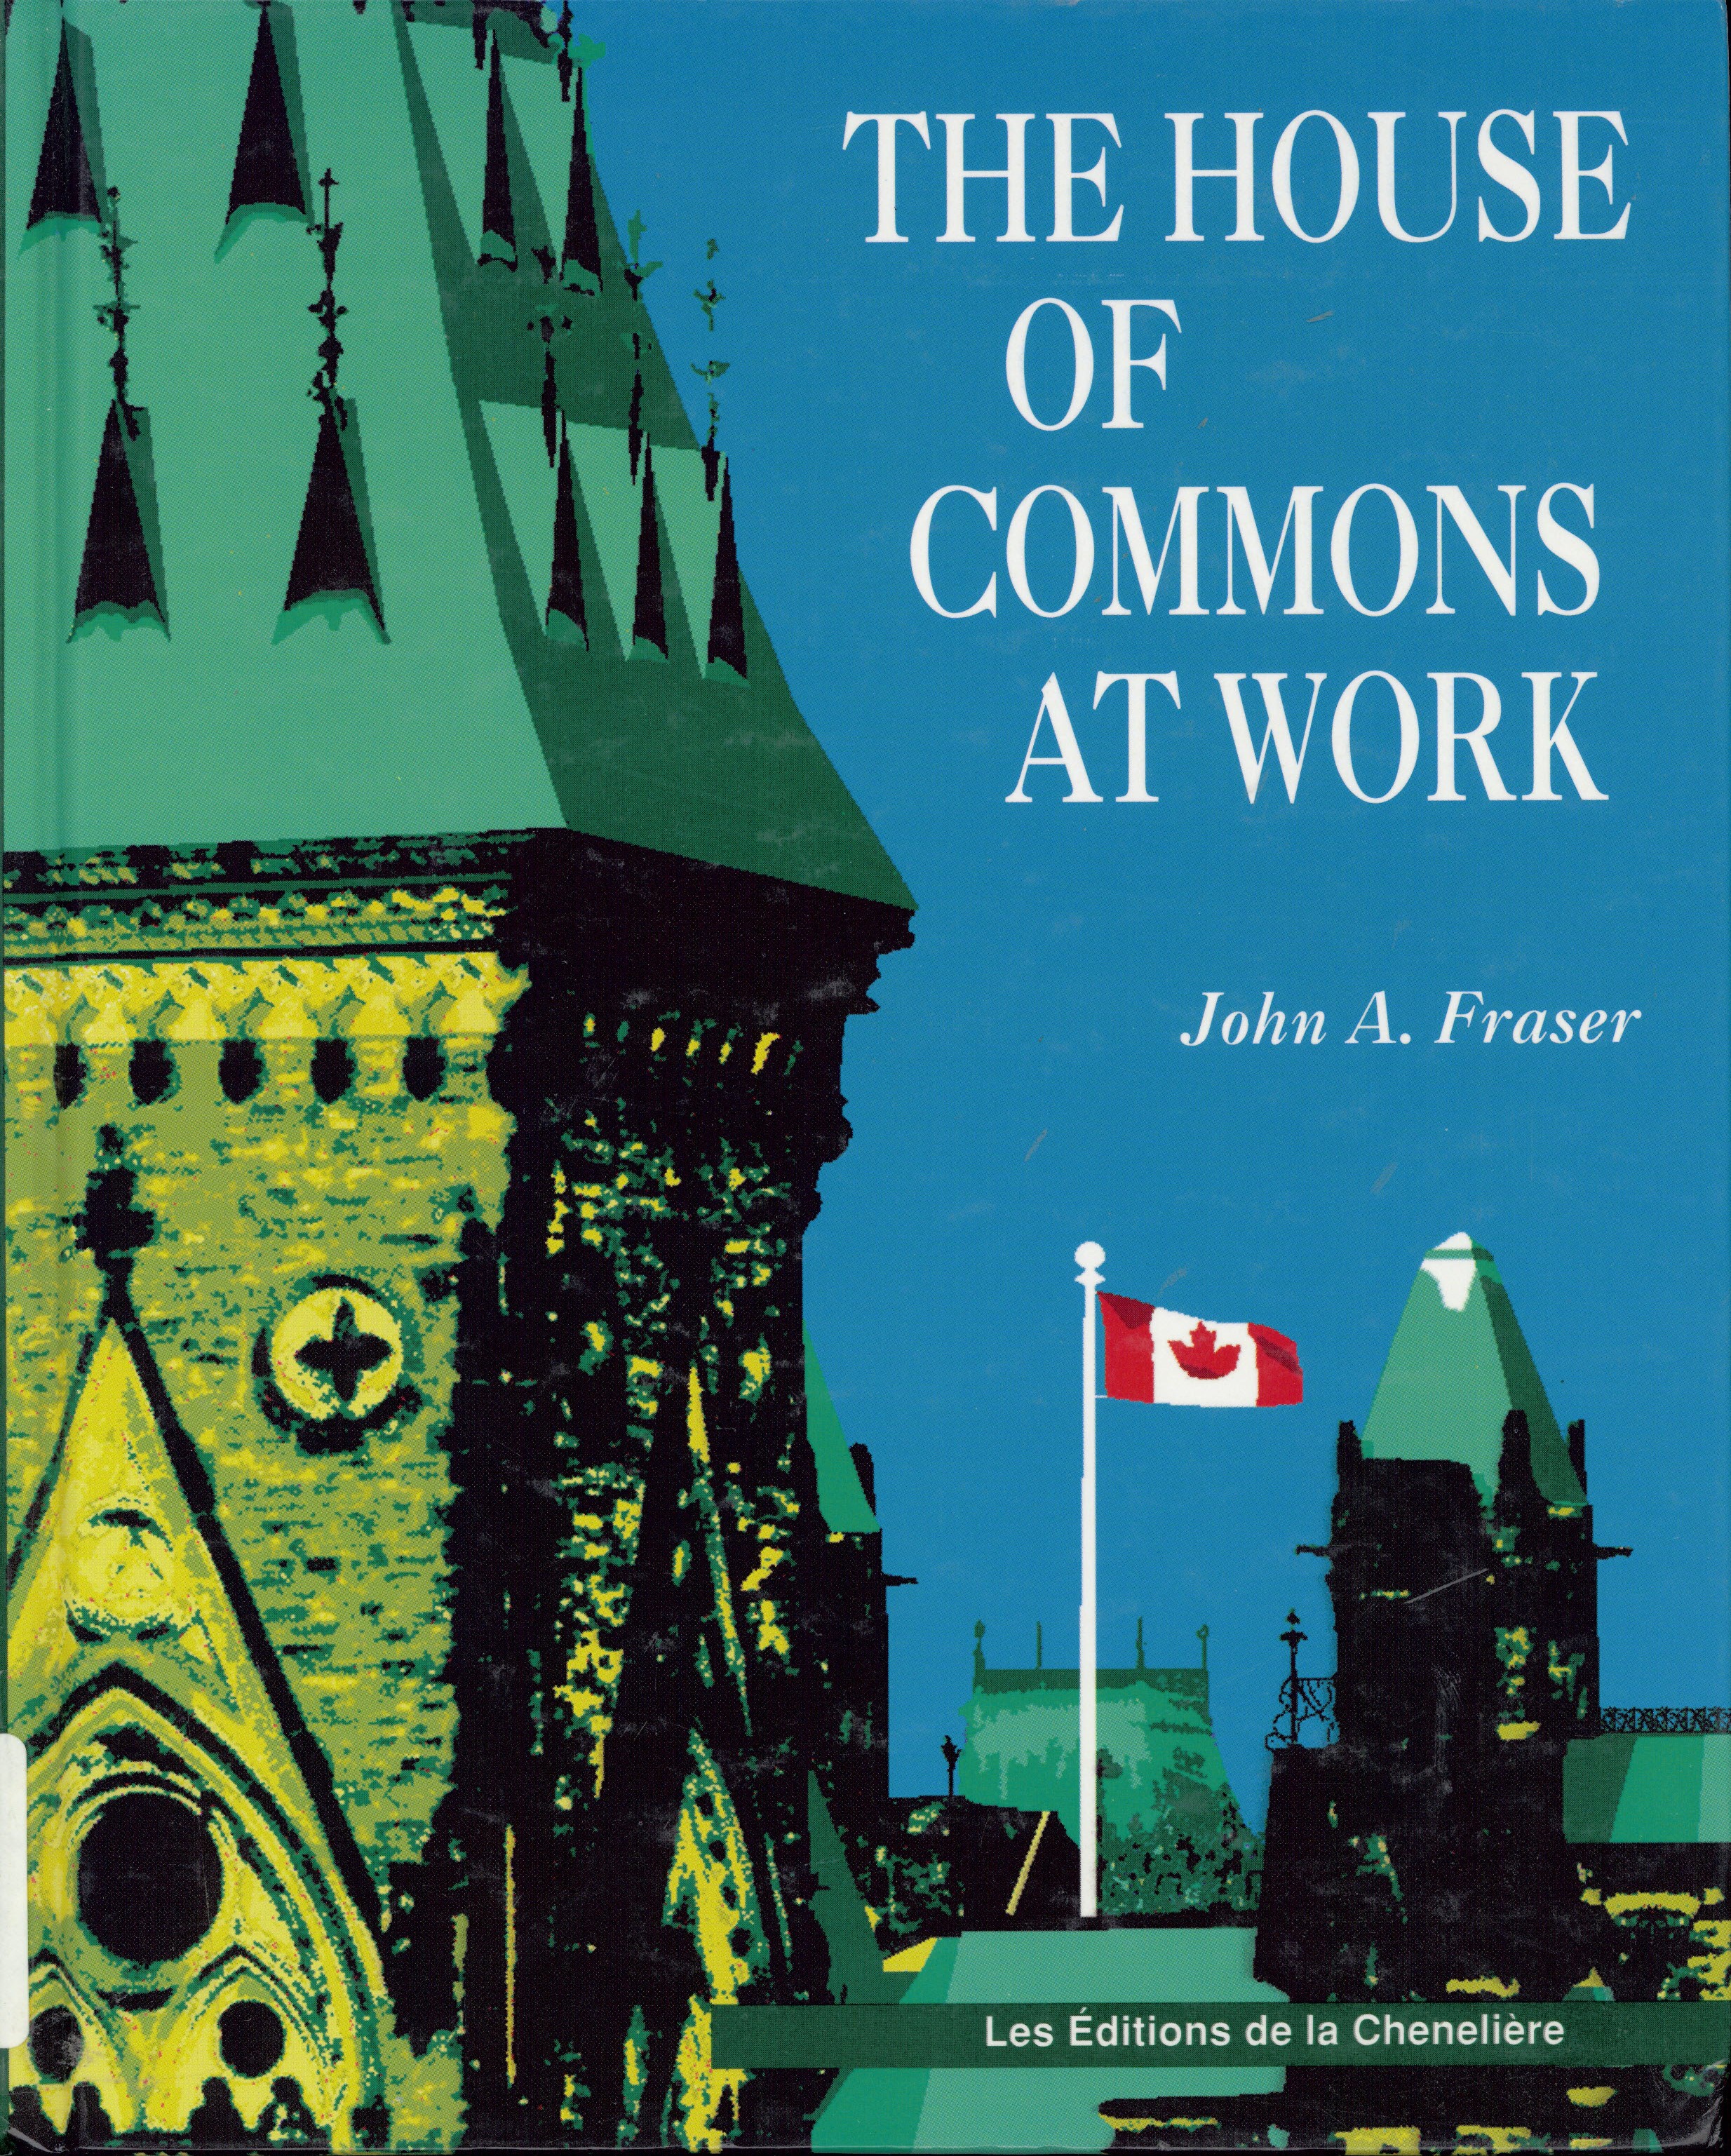 The House of Commons at work